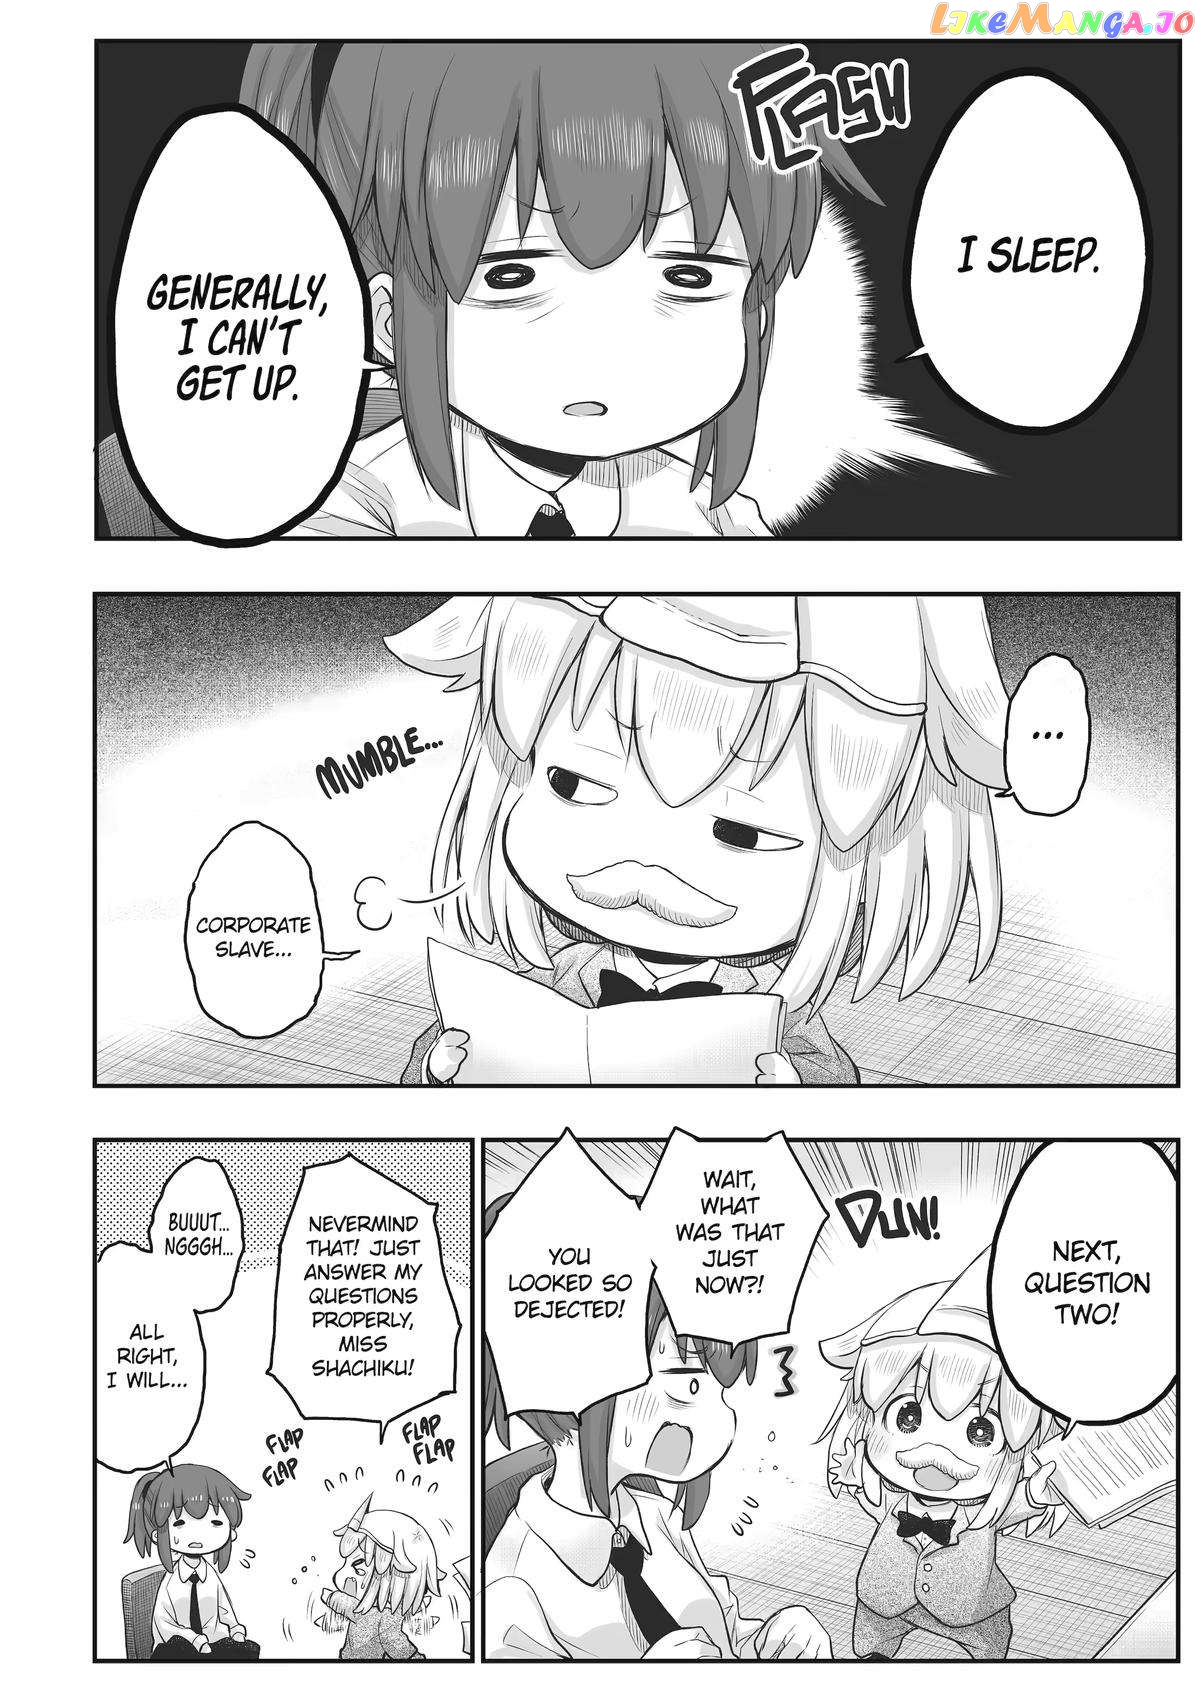 Ms. Corporate Slave Wants to be Healed by a Loli Spirit - chapter 51 - #2